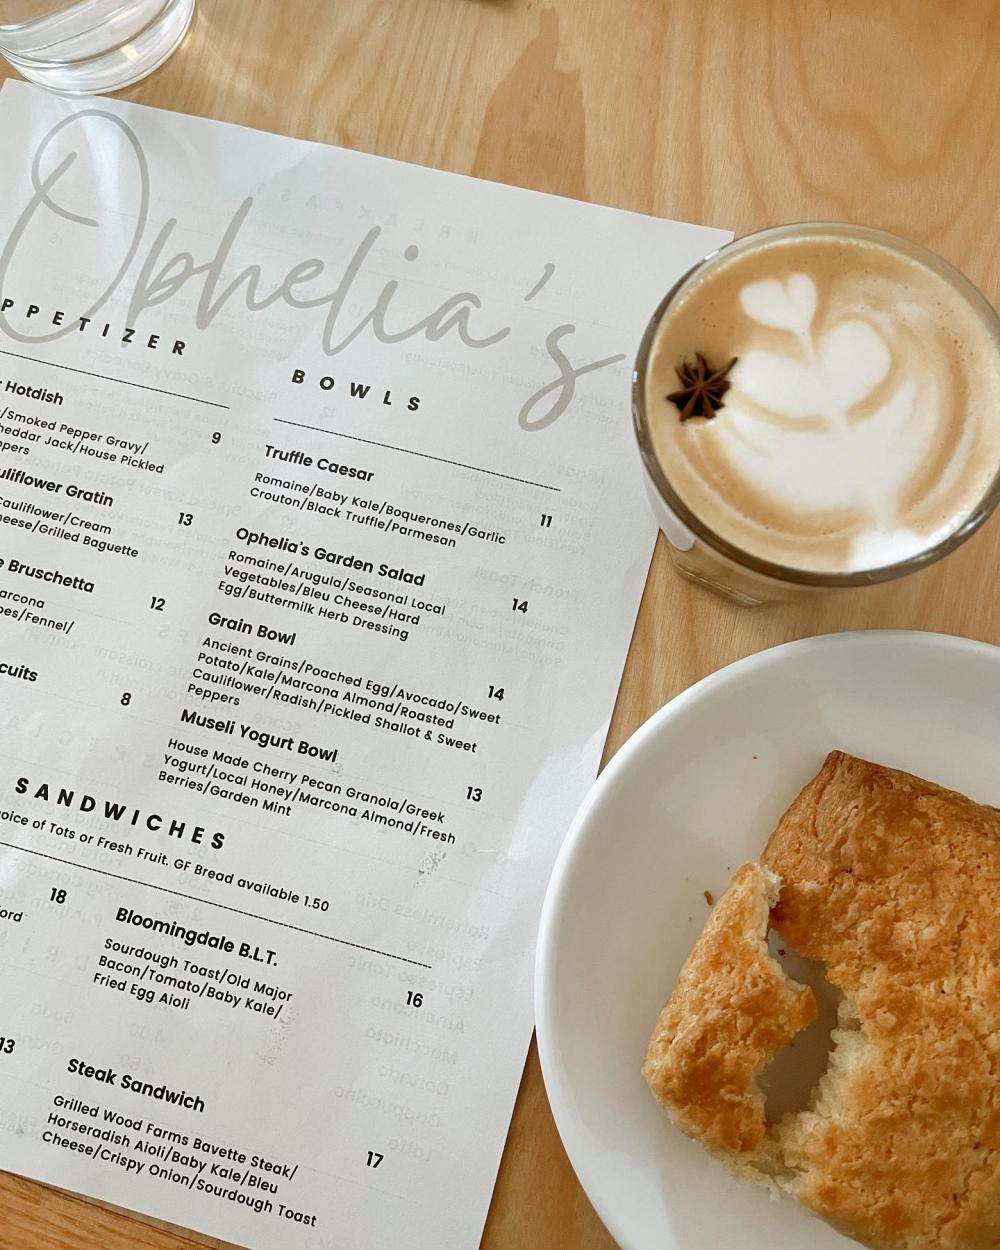 Ophelias menu, homemade biscuit, and fig cortado on a table